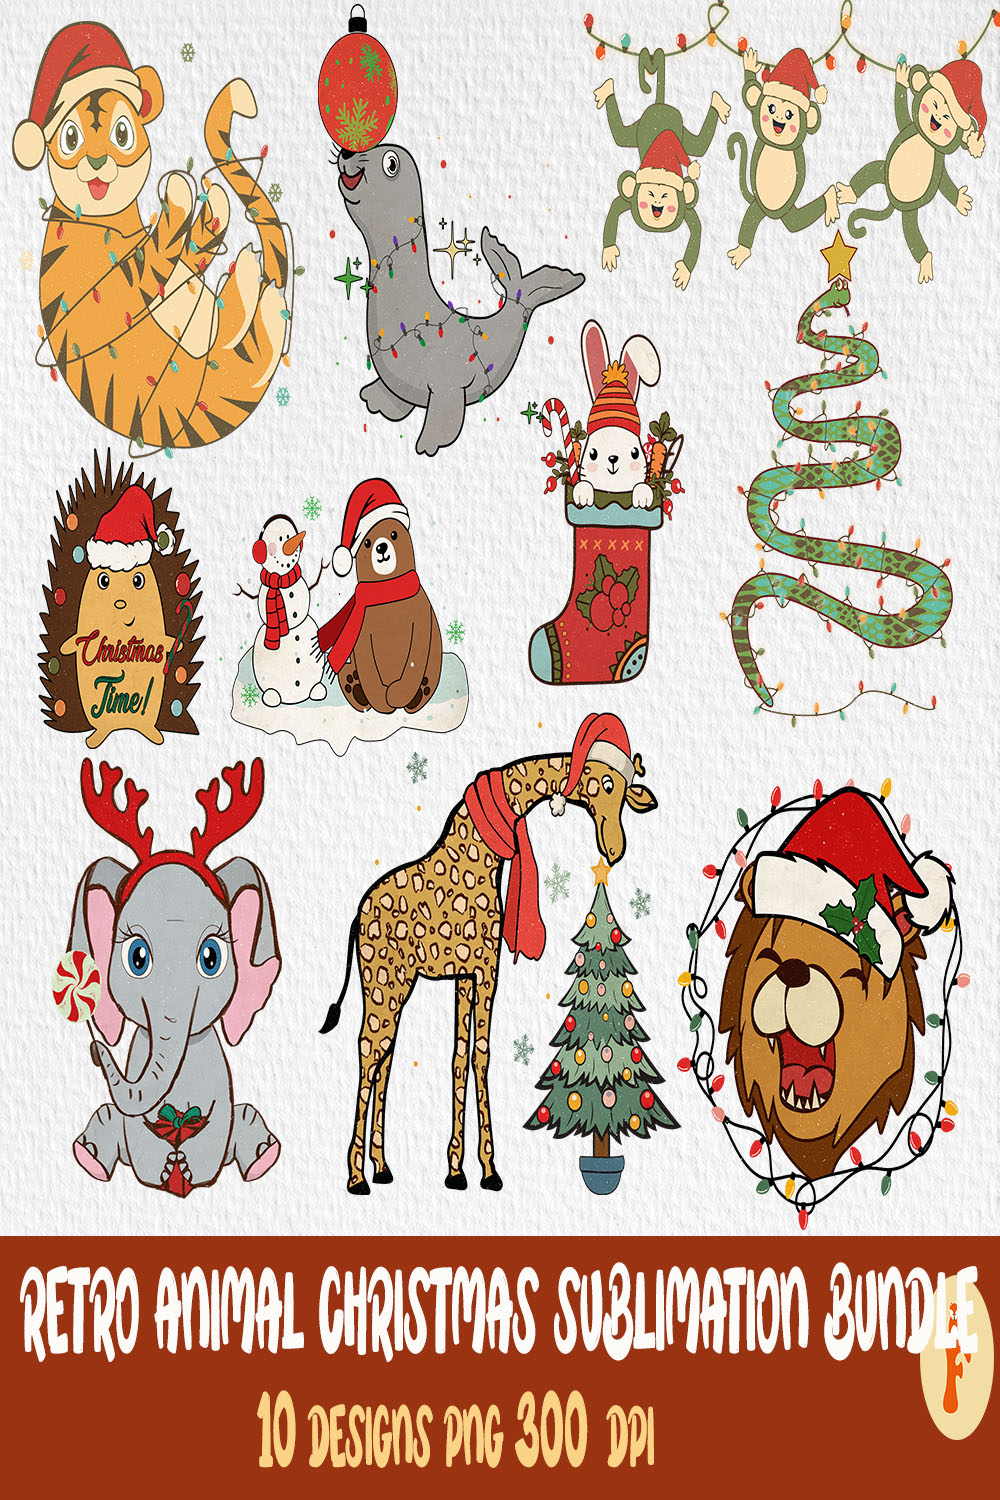 Set of colorful images of animals in Christmas hats.